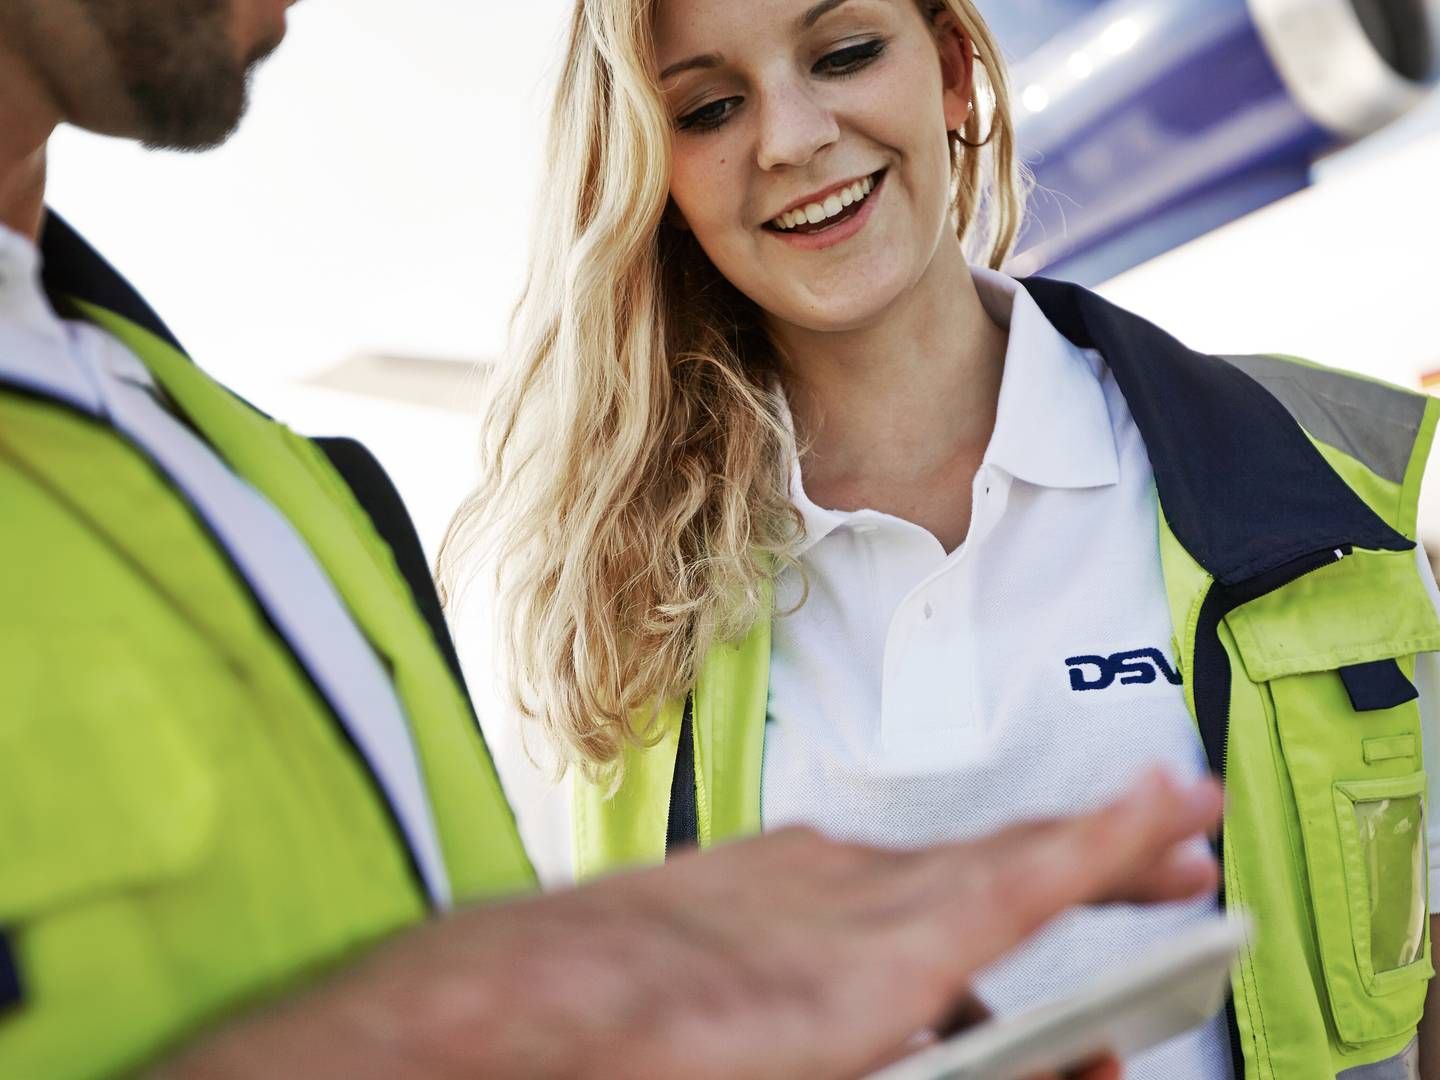 More than a third of DSV's employees are women, however, the top management is almost made up entirely by men. | Photo: DSV